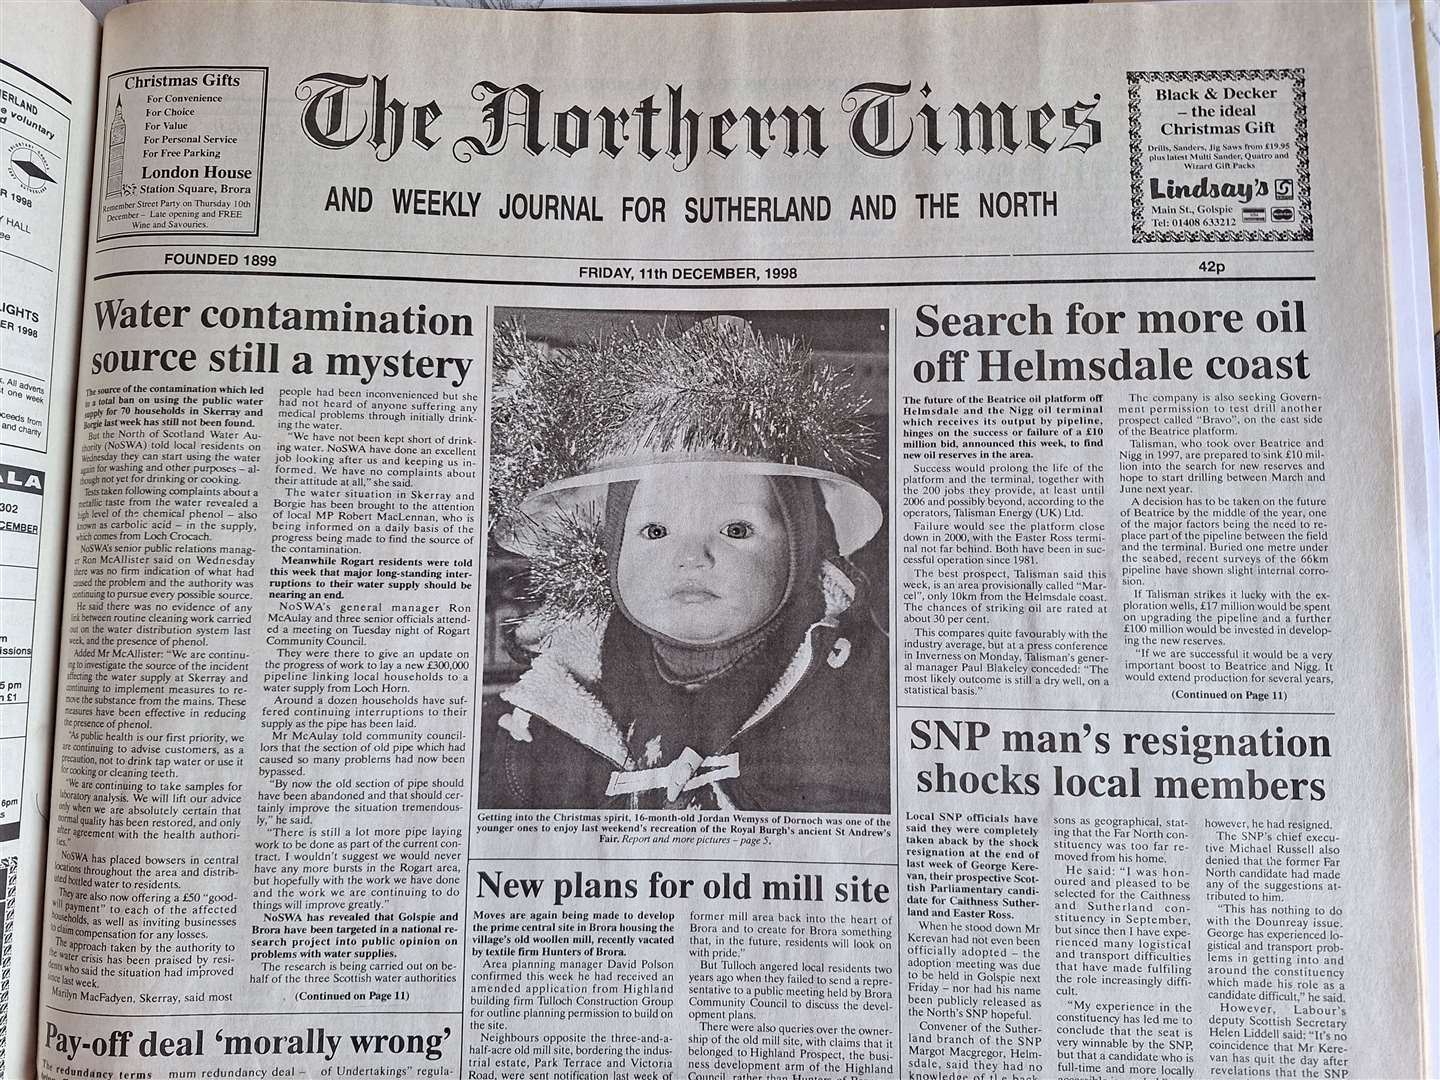 The edition of December 11, 1998.